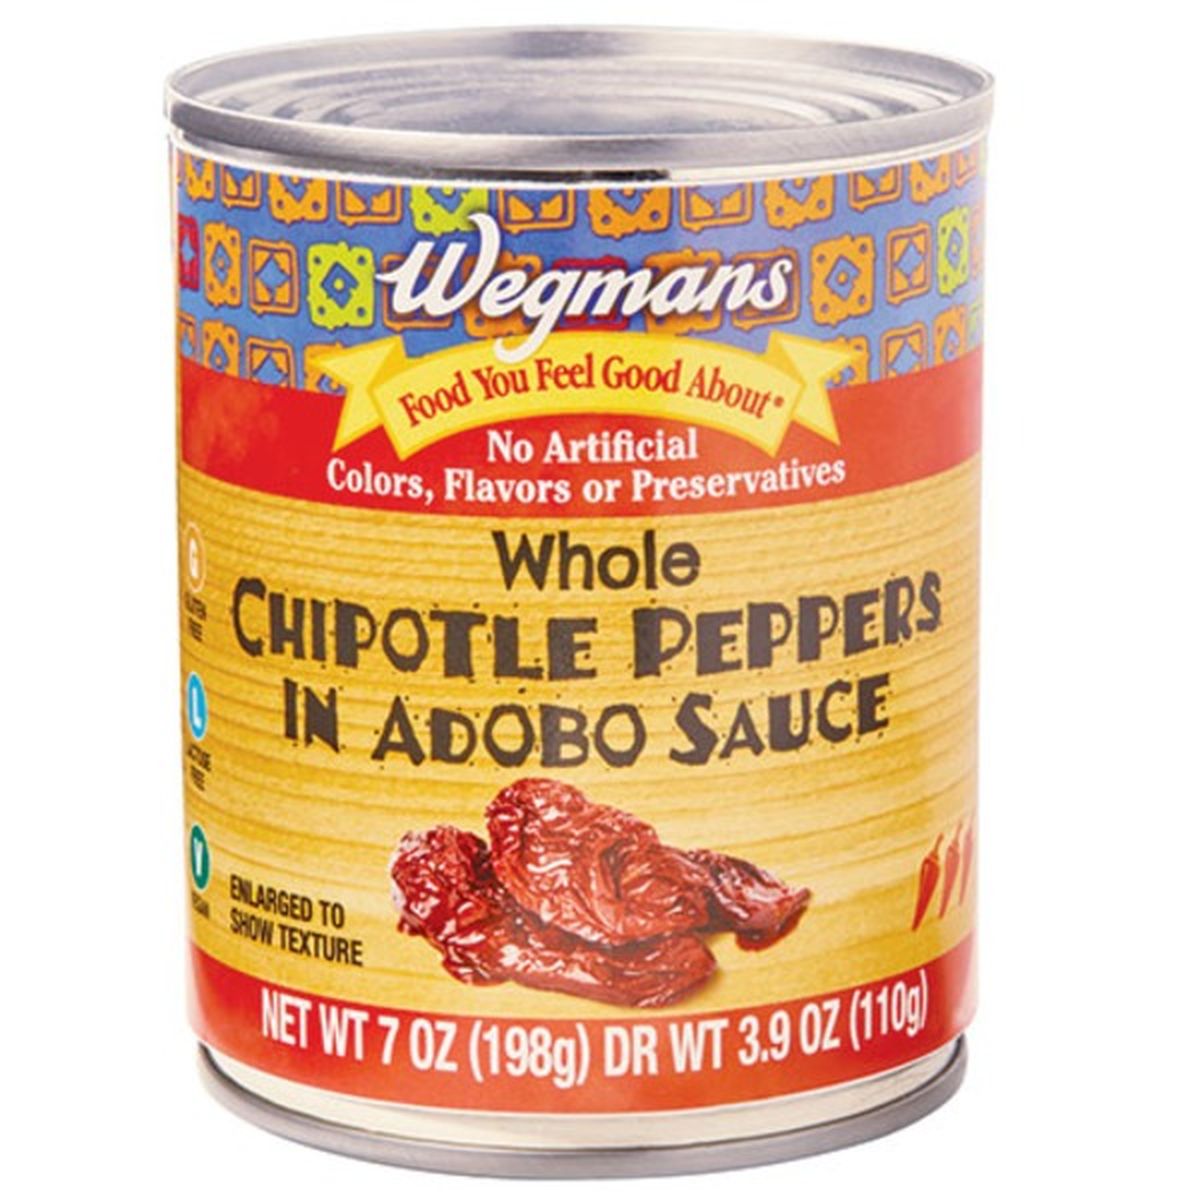 Calories in Wegmans Whole Chipotle Peppers in Adobo Sauce